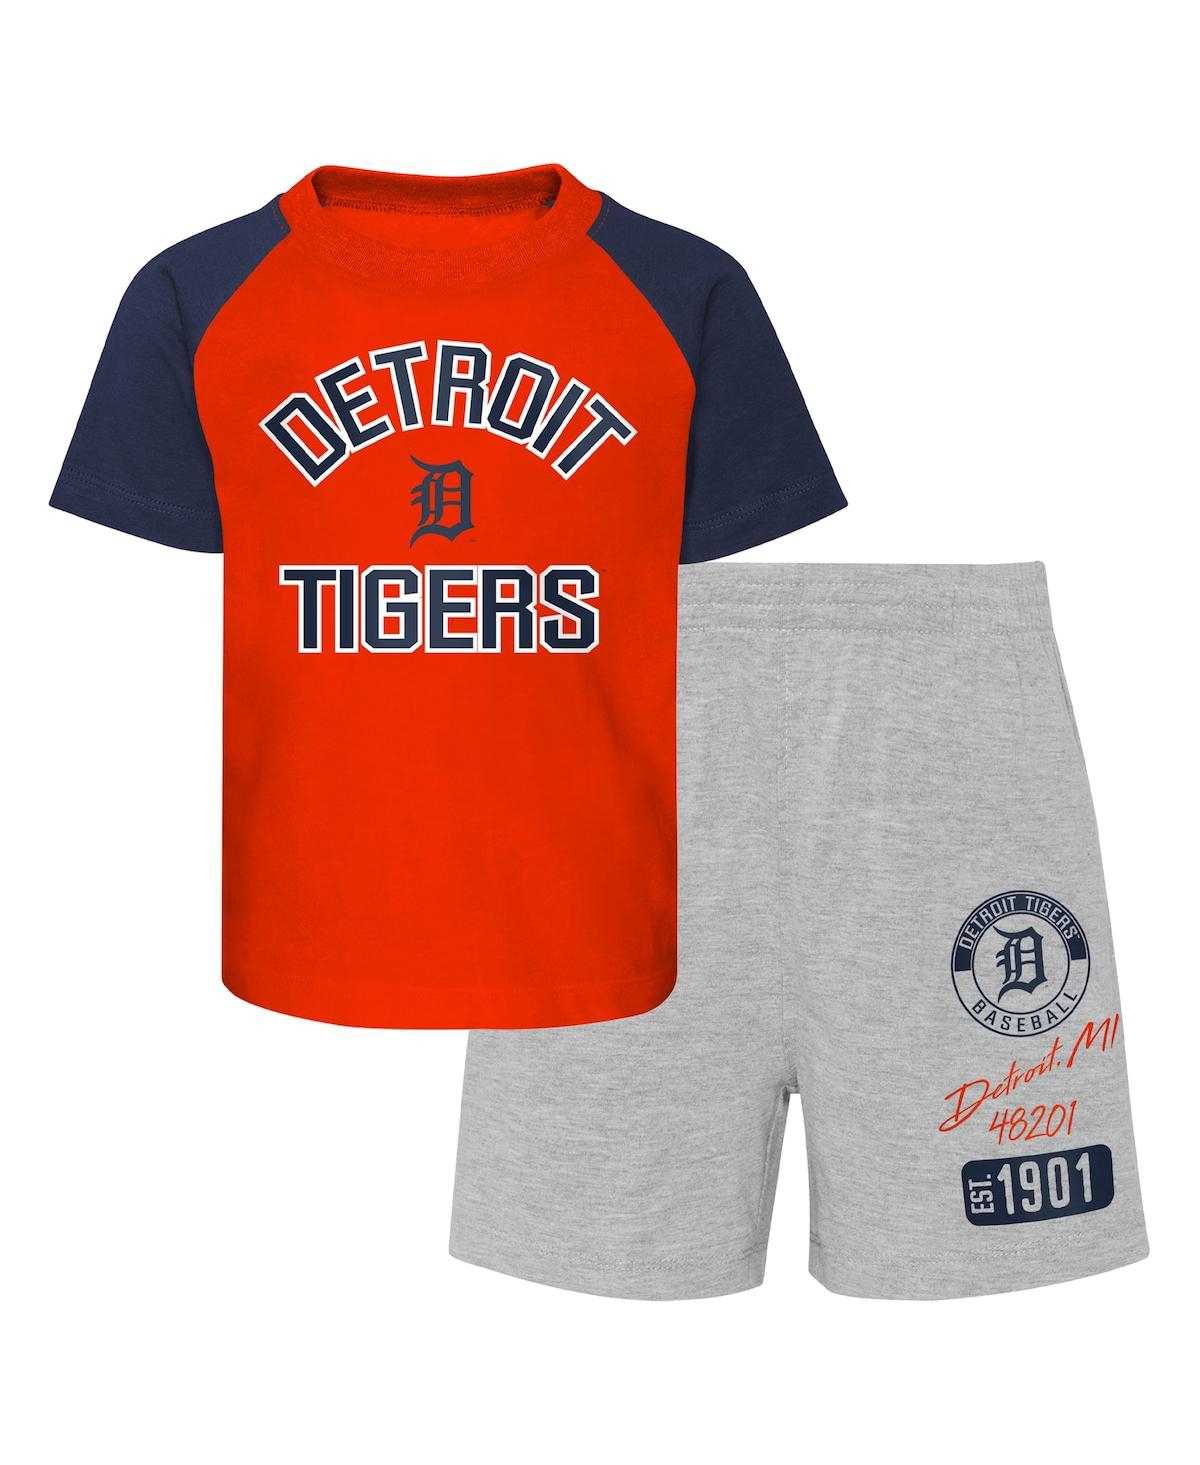 Outerstuff Babies' Infant Boys And Girls Orange And Heather Gray Detroit Tigers Ground Out Baller Raglan T-shirt And Sh In Orange,heather Gray